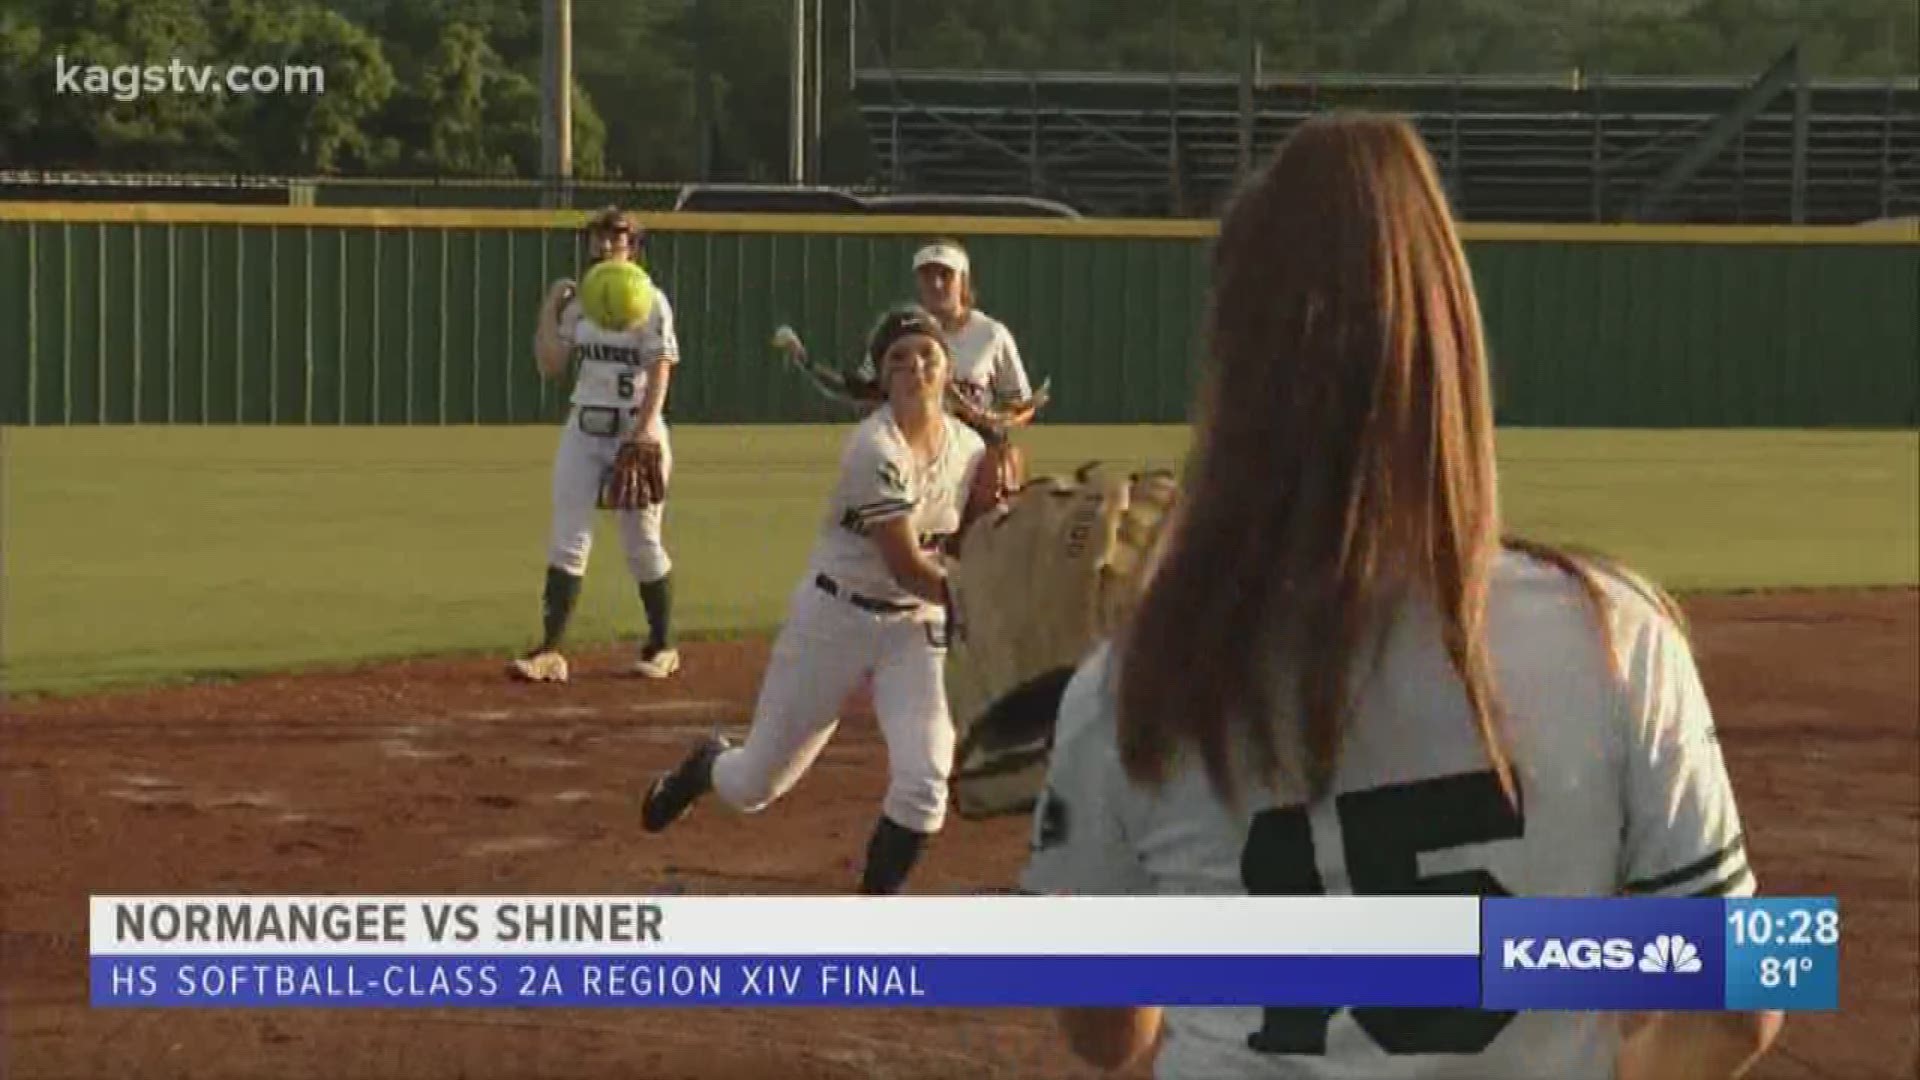 Already enjoying its best season ever, Normangee softball keeps it going by knocking off Shiner to advance to the state tournament.